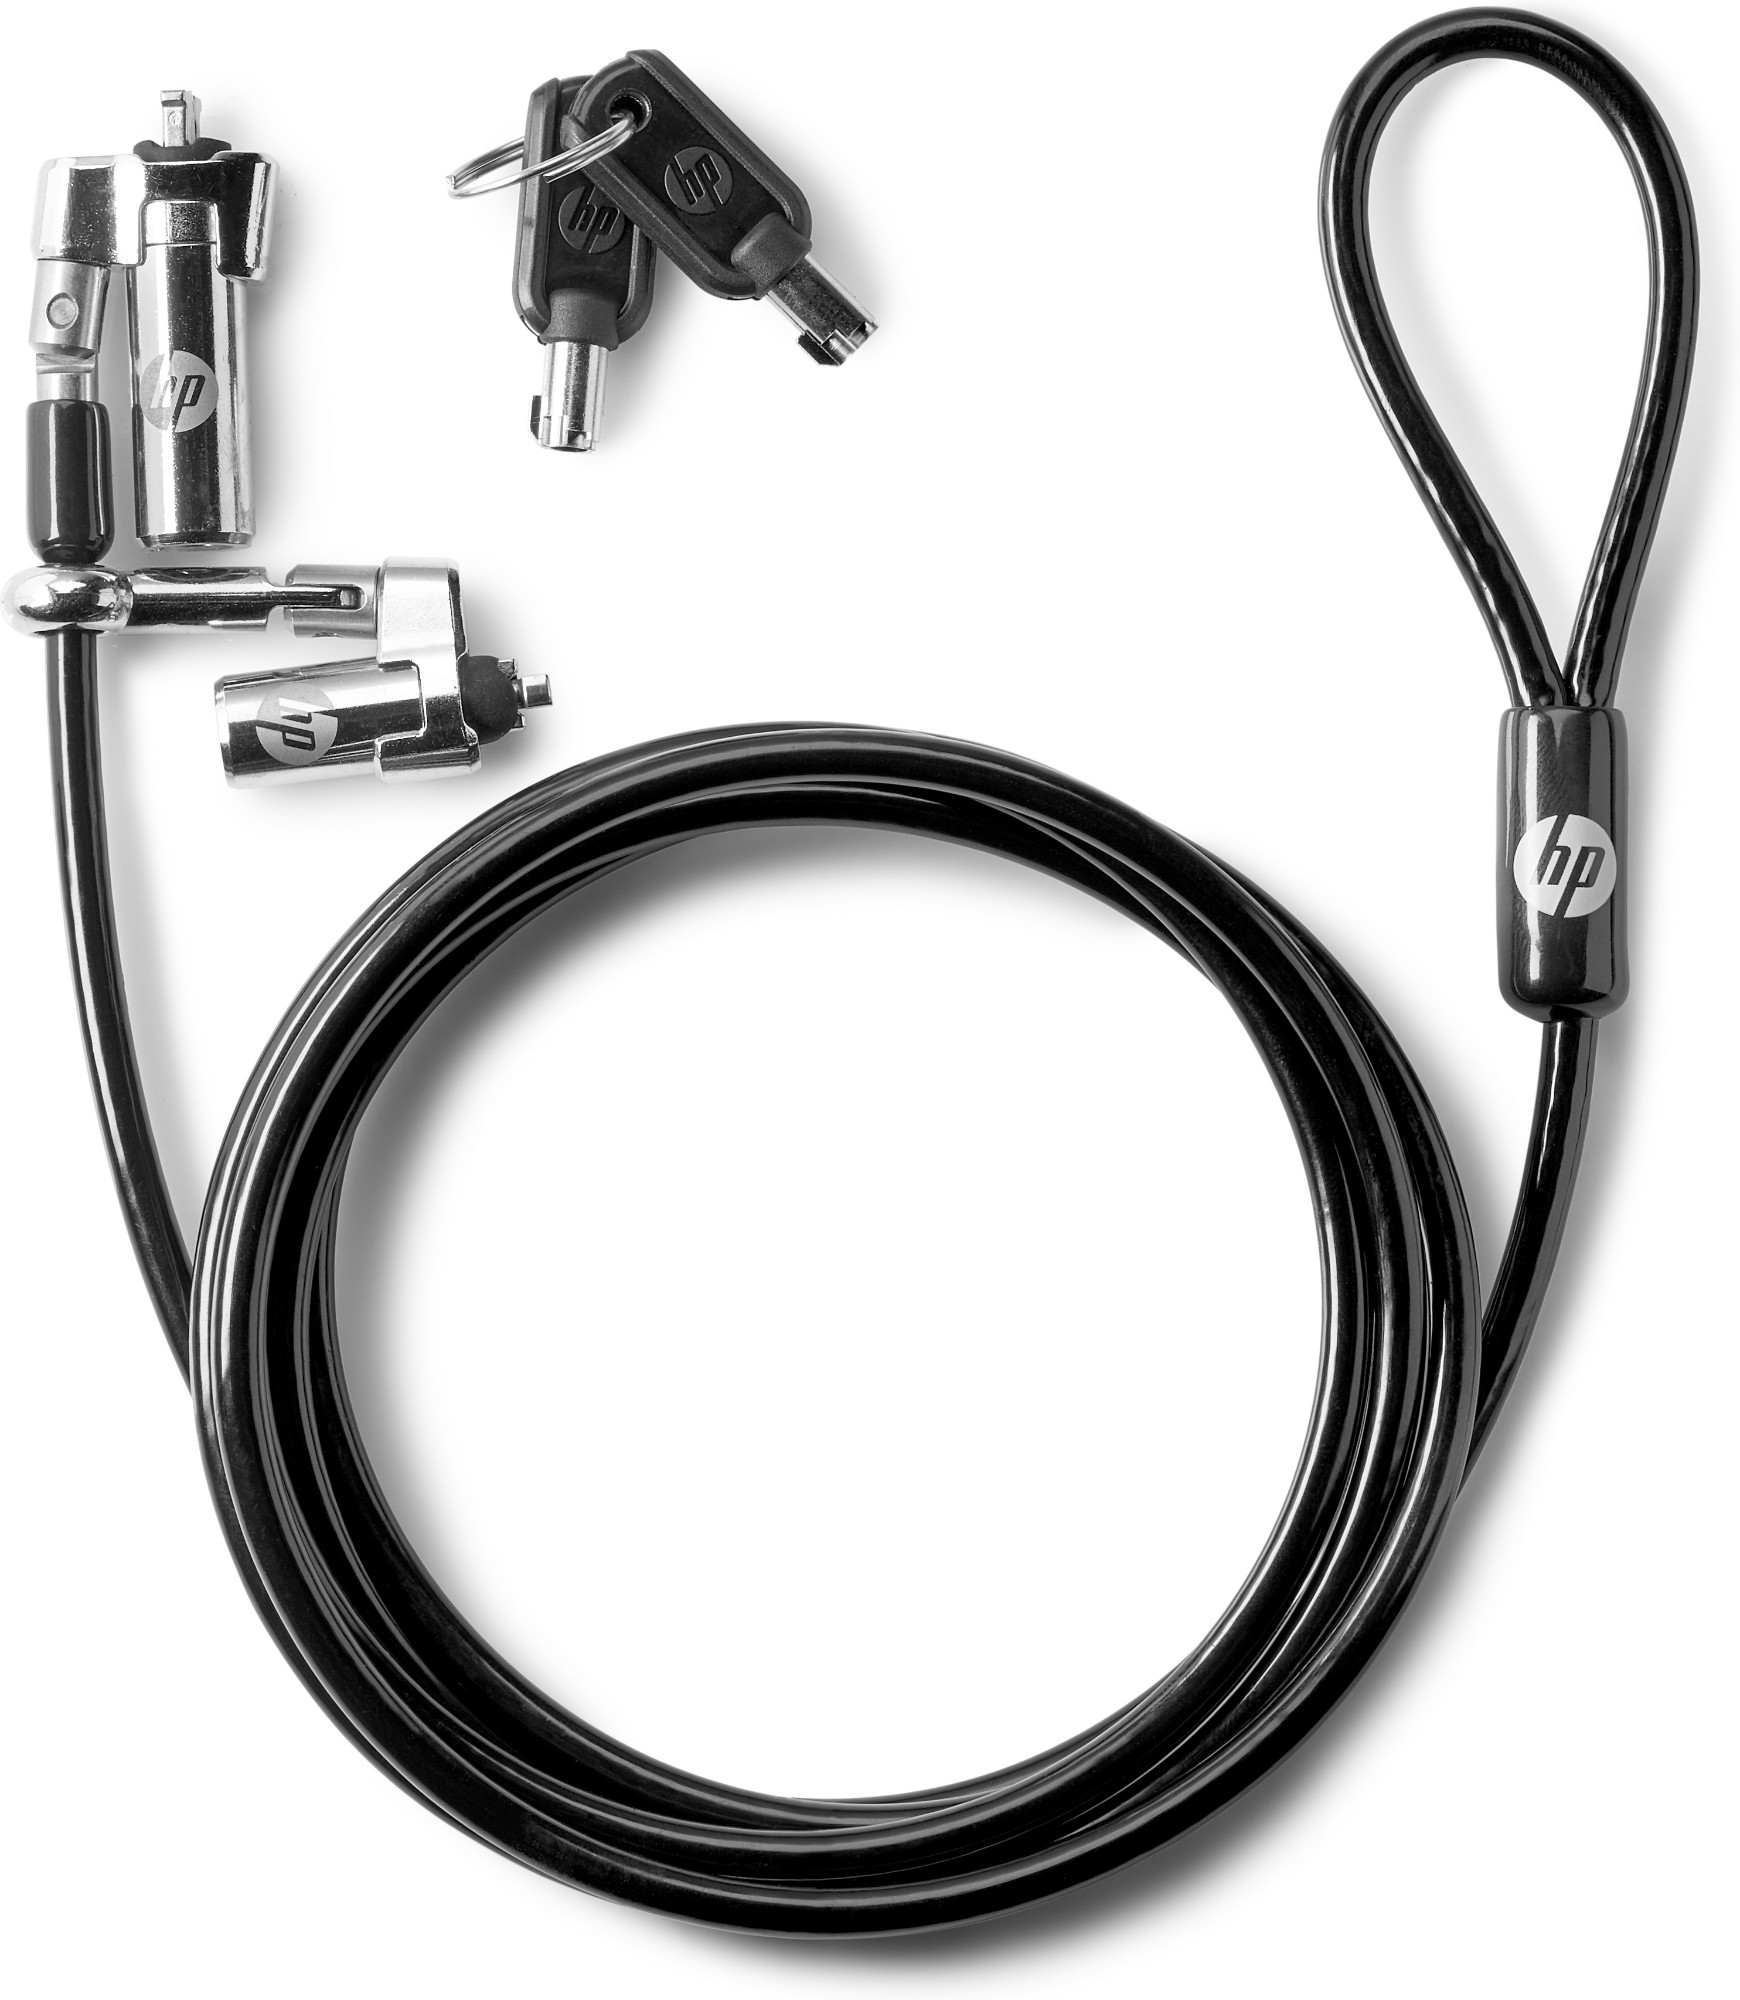 Photos - Cable (video, audio, USB) HP Dual Head Keyed Cable Lock 10 mm T1A64AA 